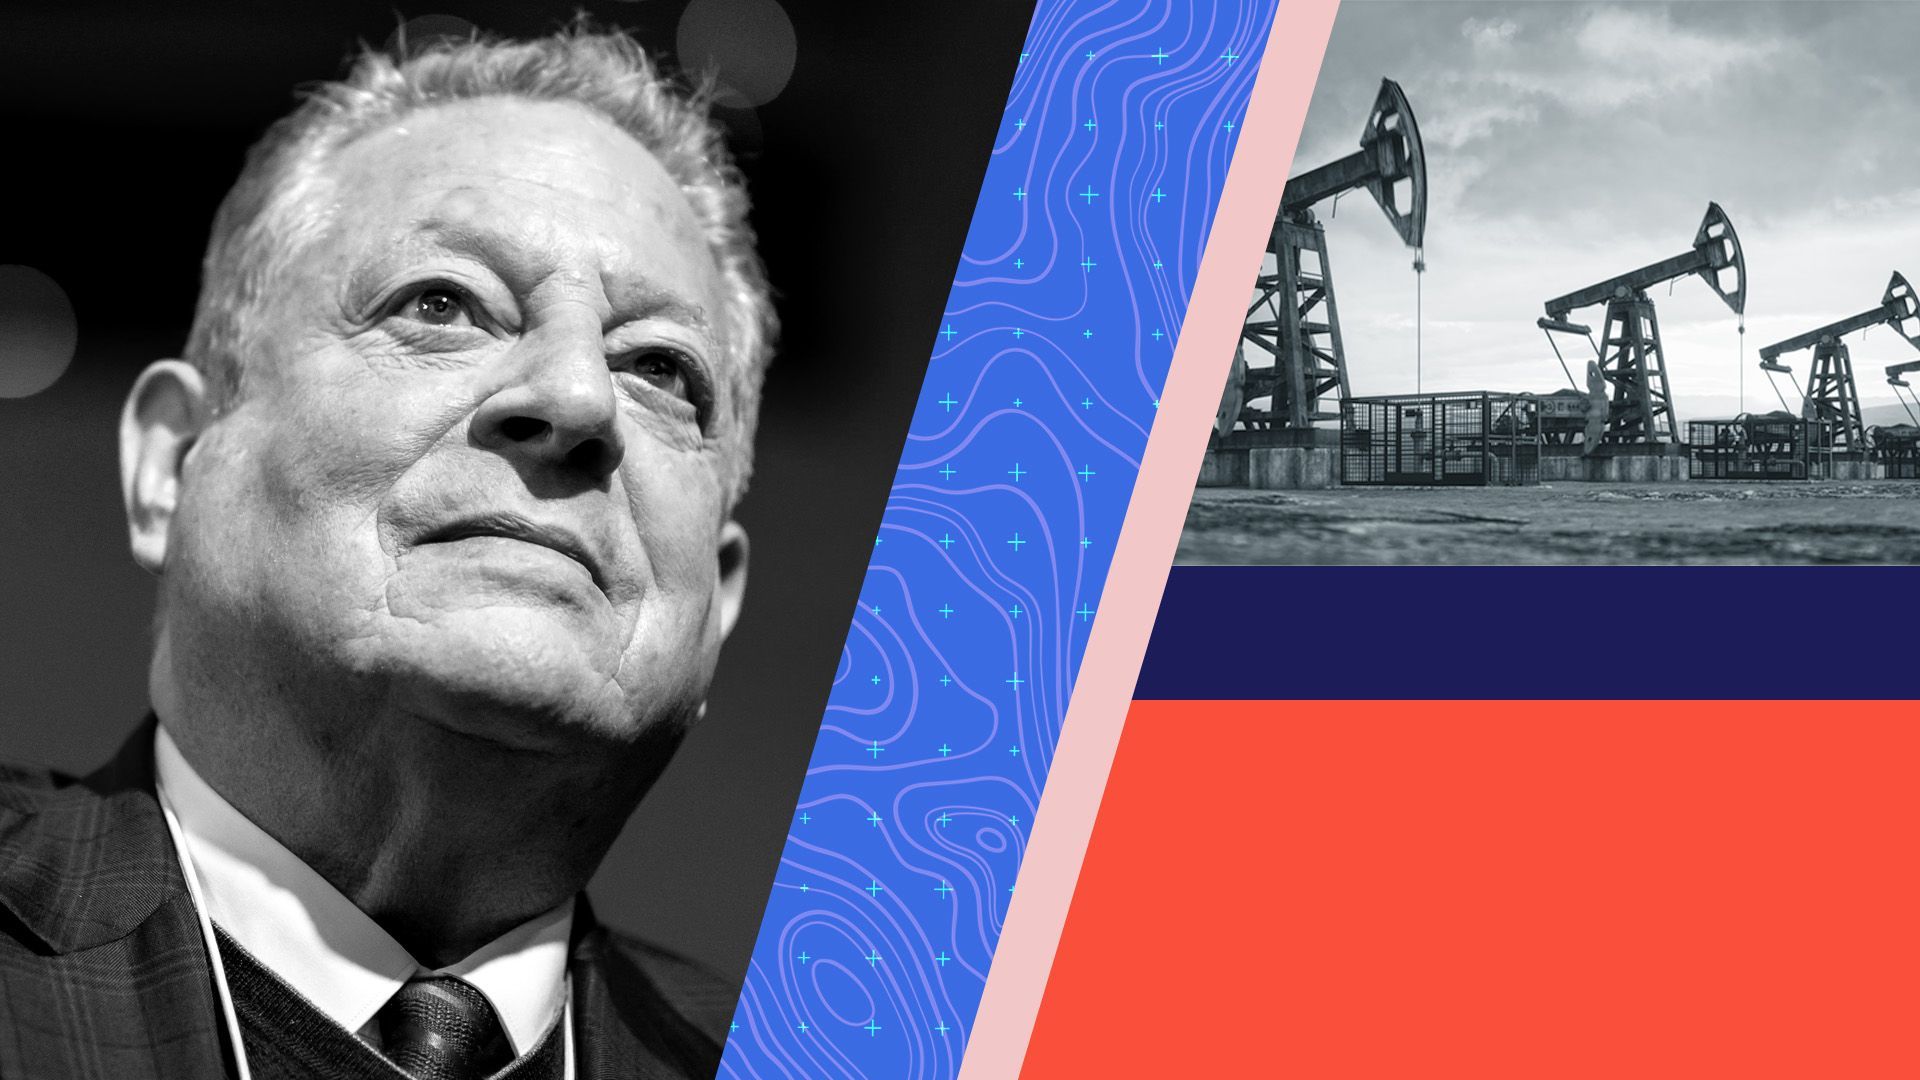 Gore blasts COP28 climate chief and oil companies' emissions